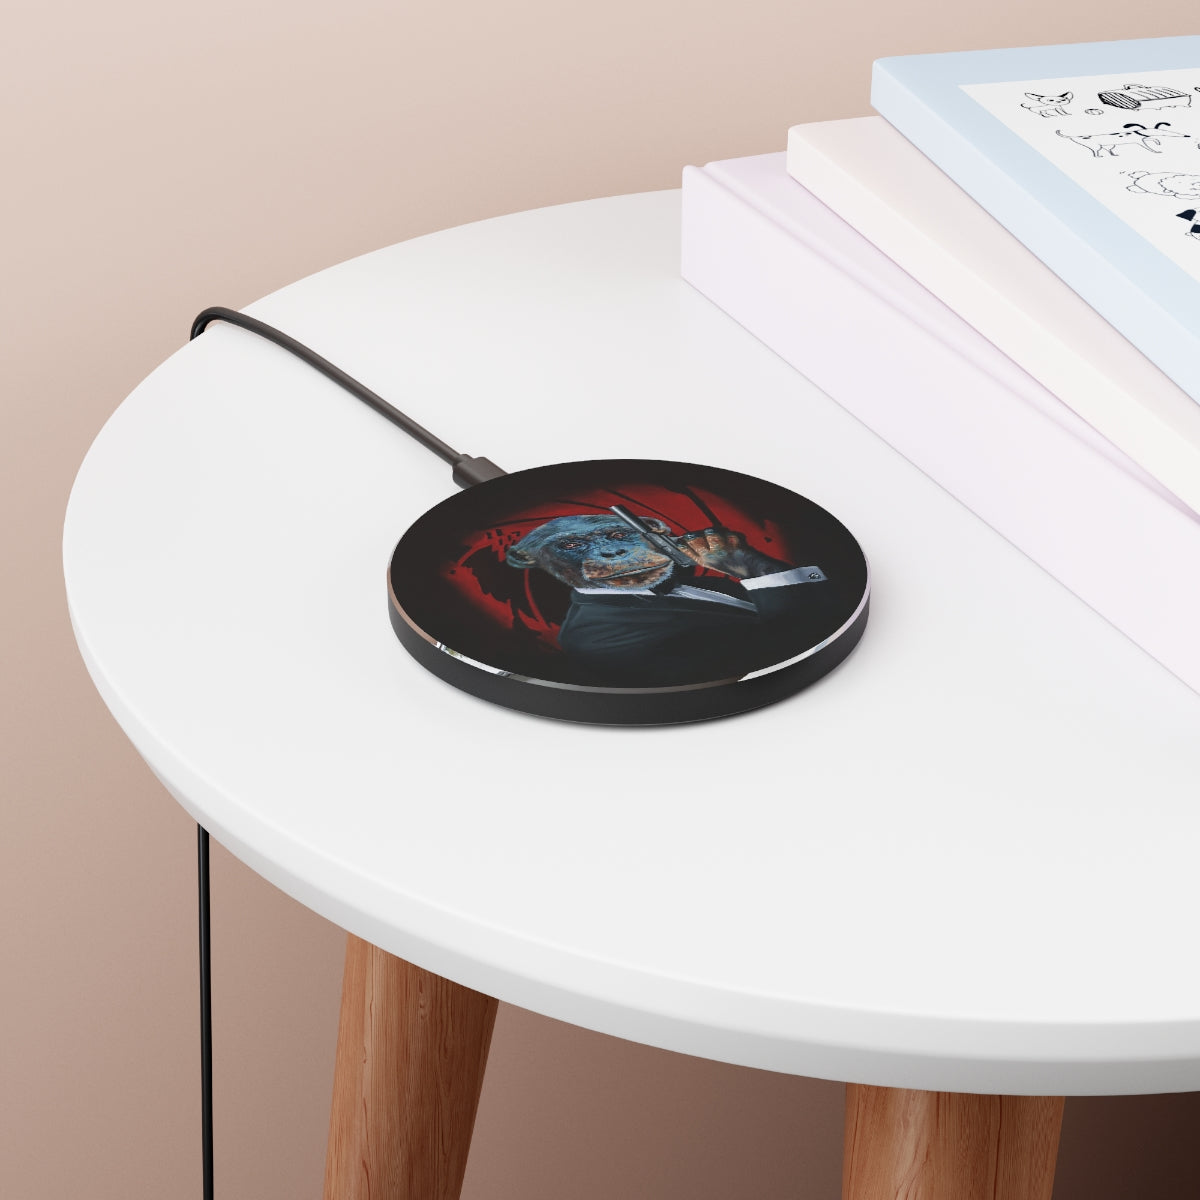 Tony South: "Shaken Not Stirred" Wireless Charger